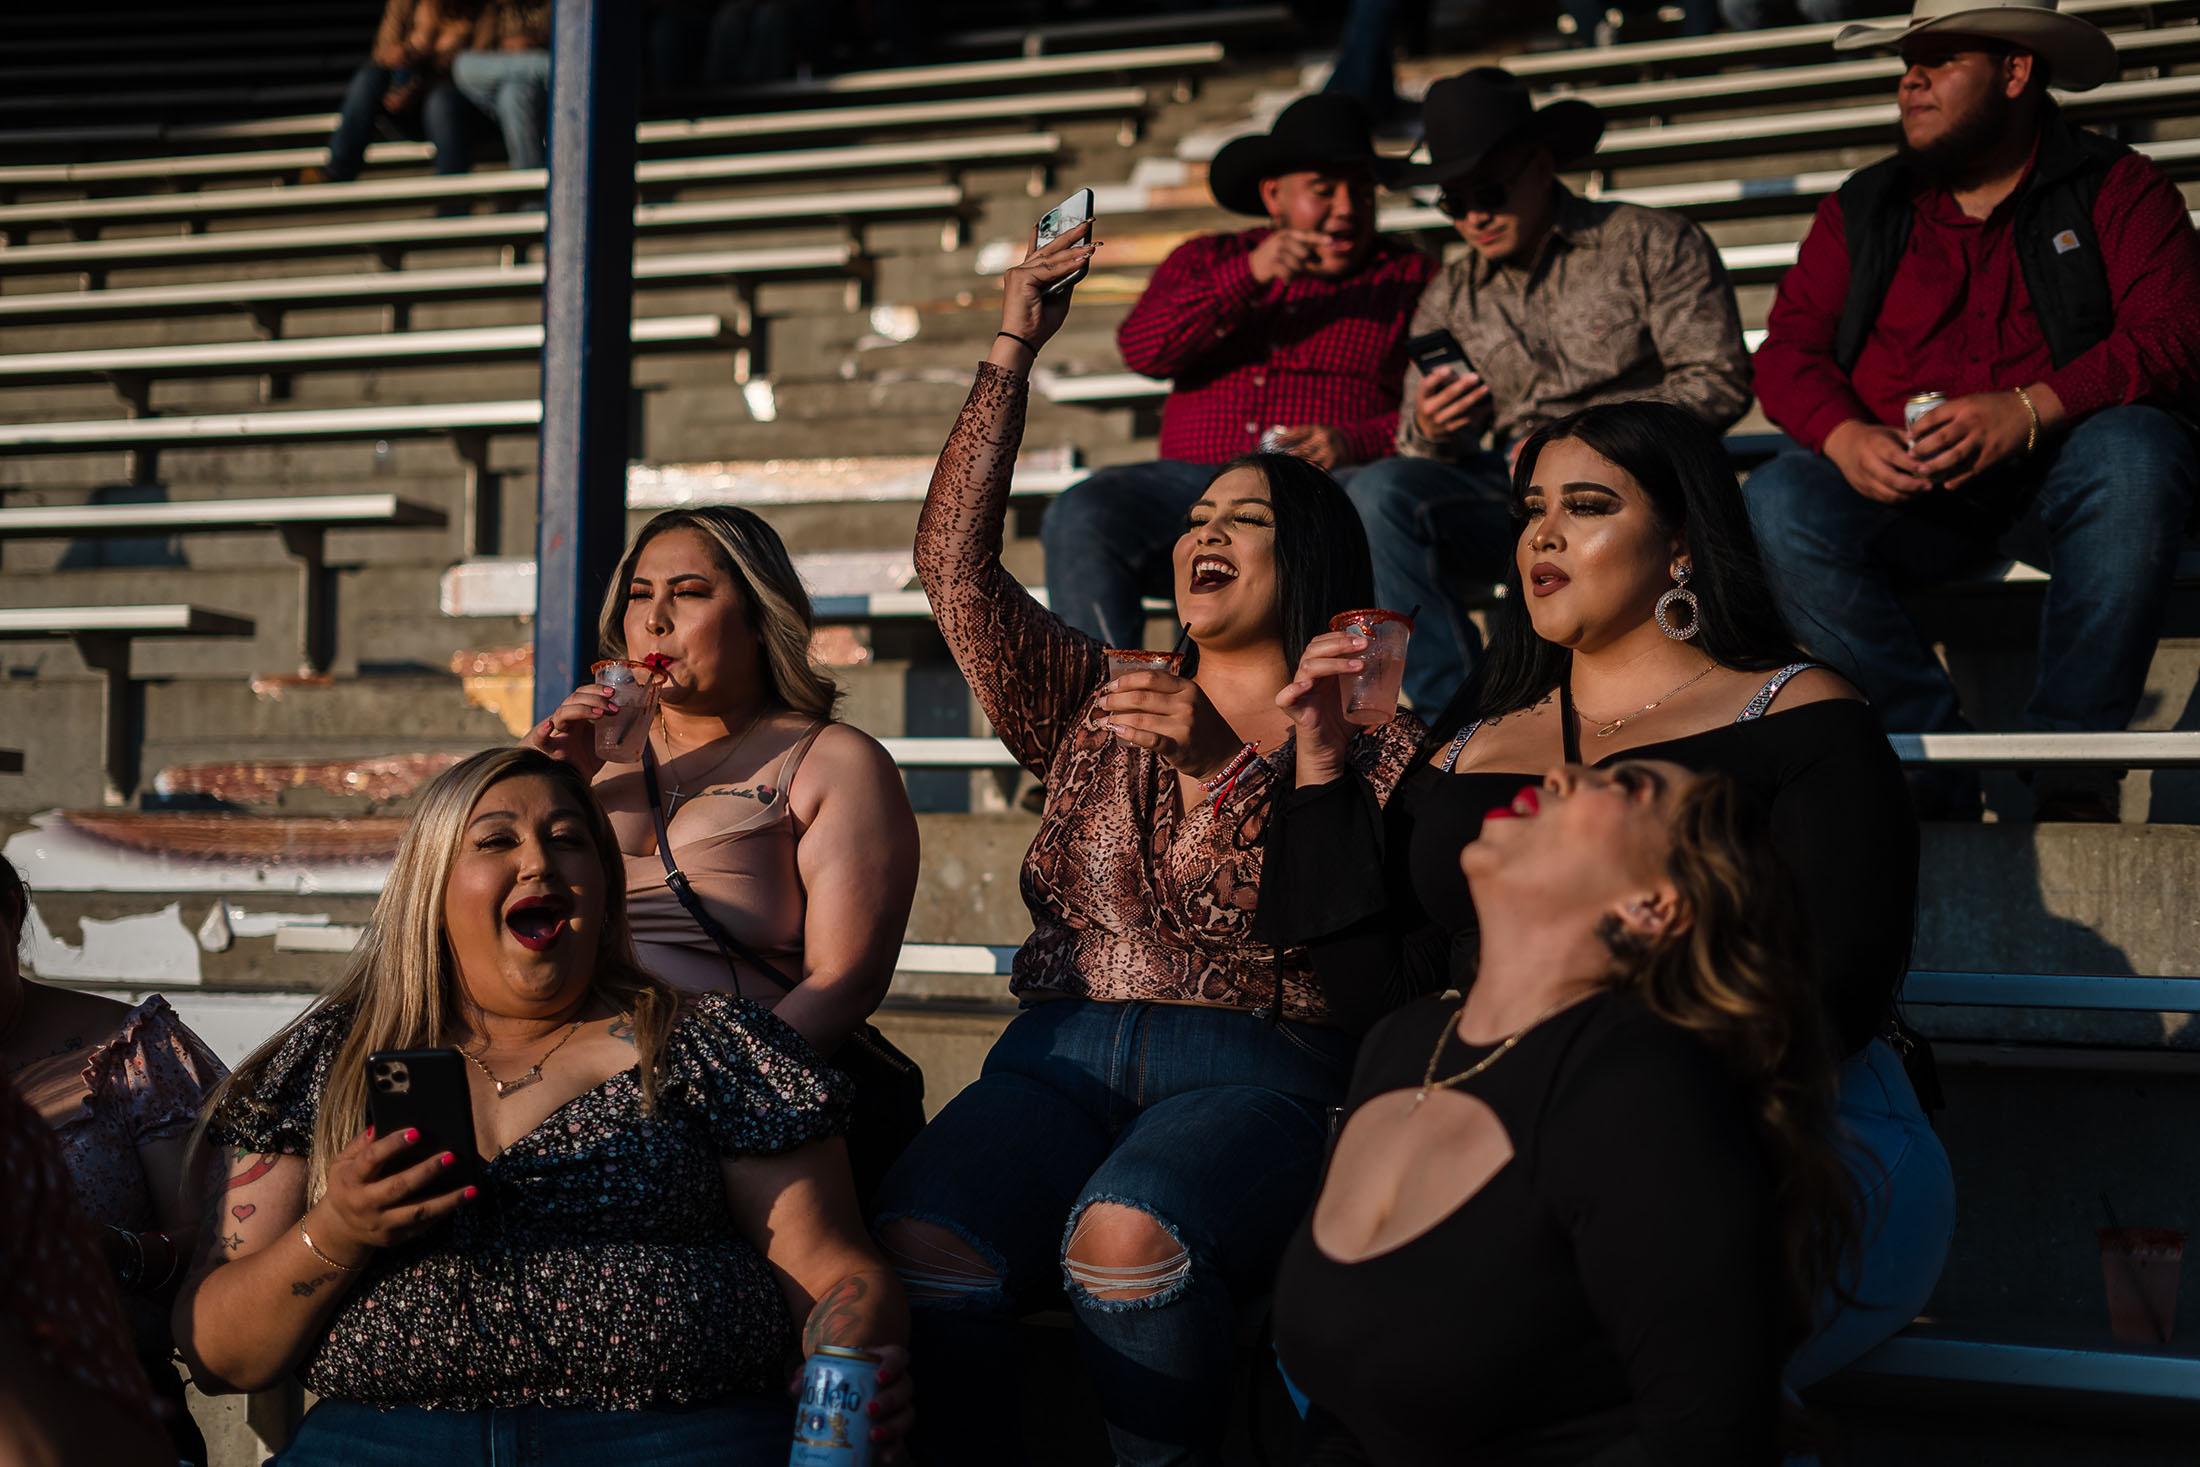 People sit in the bleachers after the charrer&iacute;a competition at Pico Rivera Sports Arena in Pico Rivera, California on July 16, 2021. After the competition many gathered listening to live music and danced.